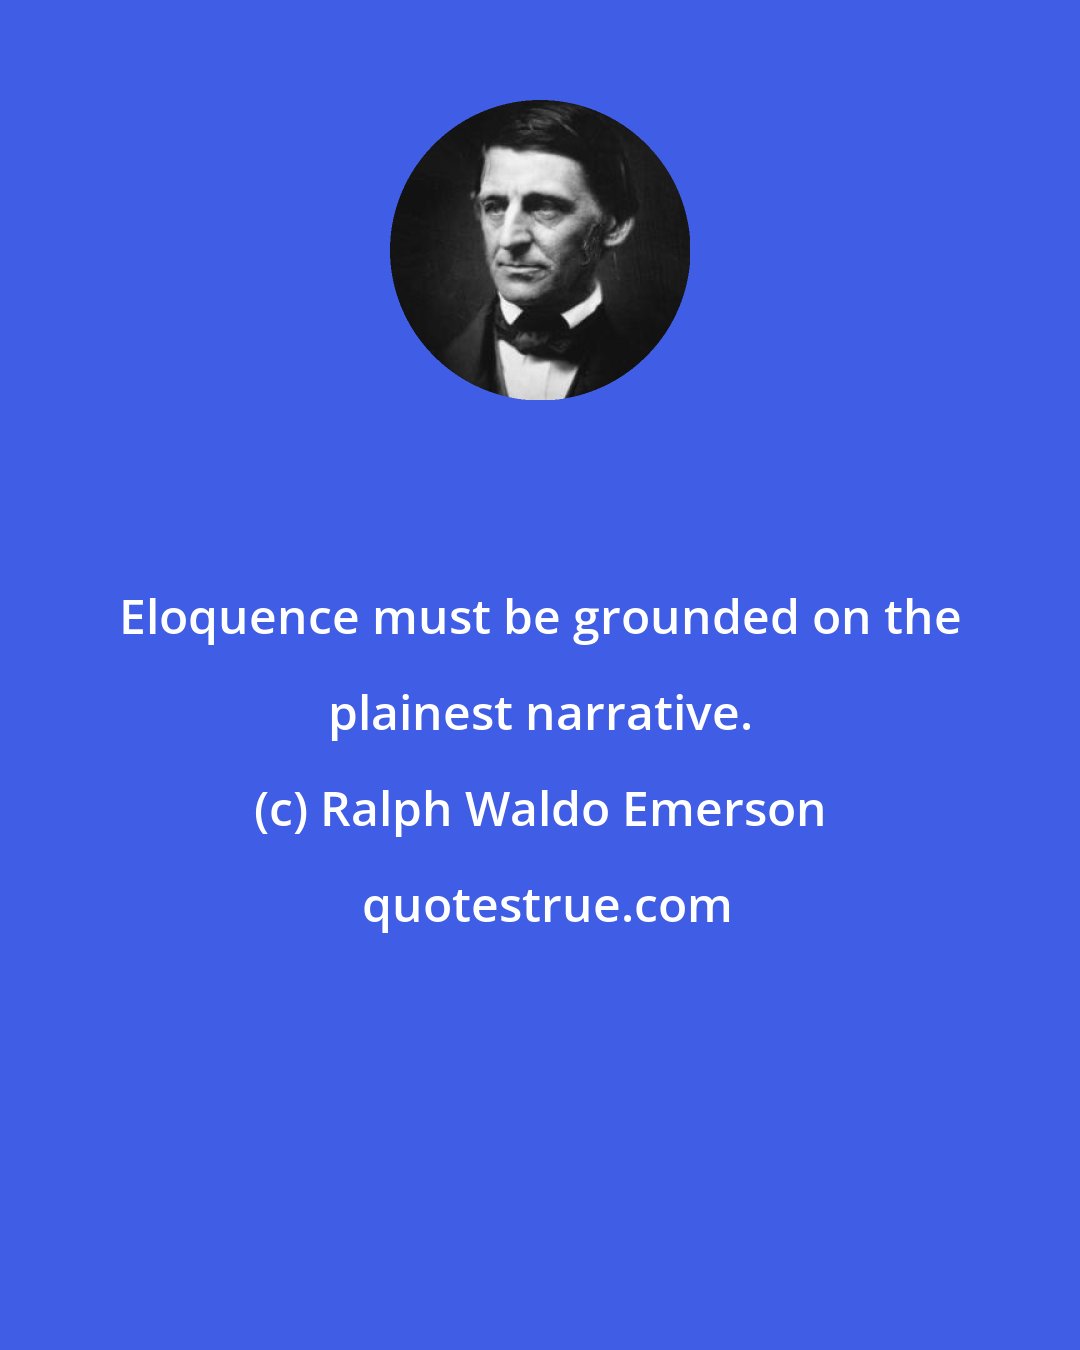 Ralph Waldo Emerson: Eloquence must be grounded on the plainest narrative.